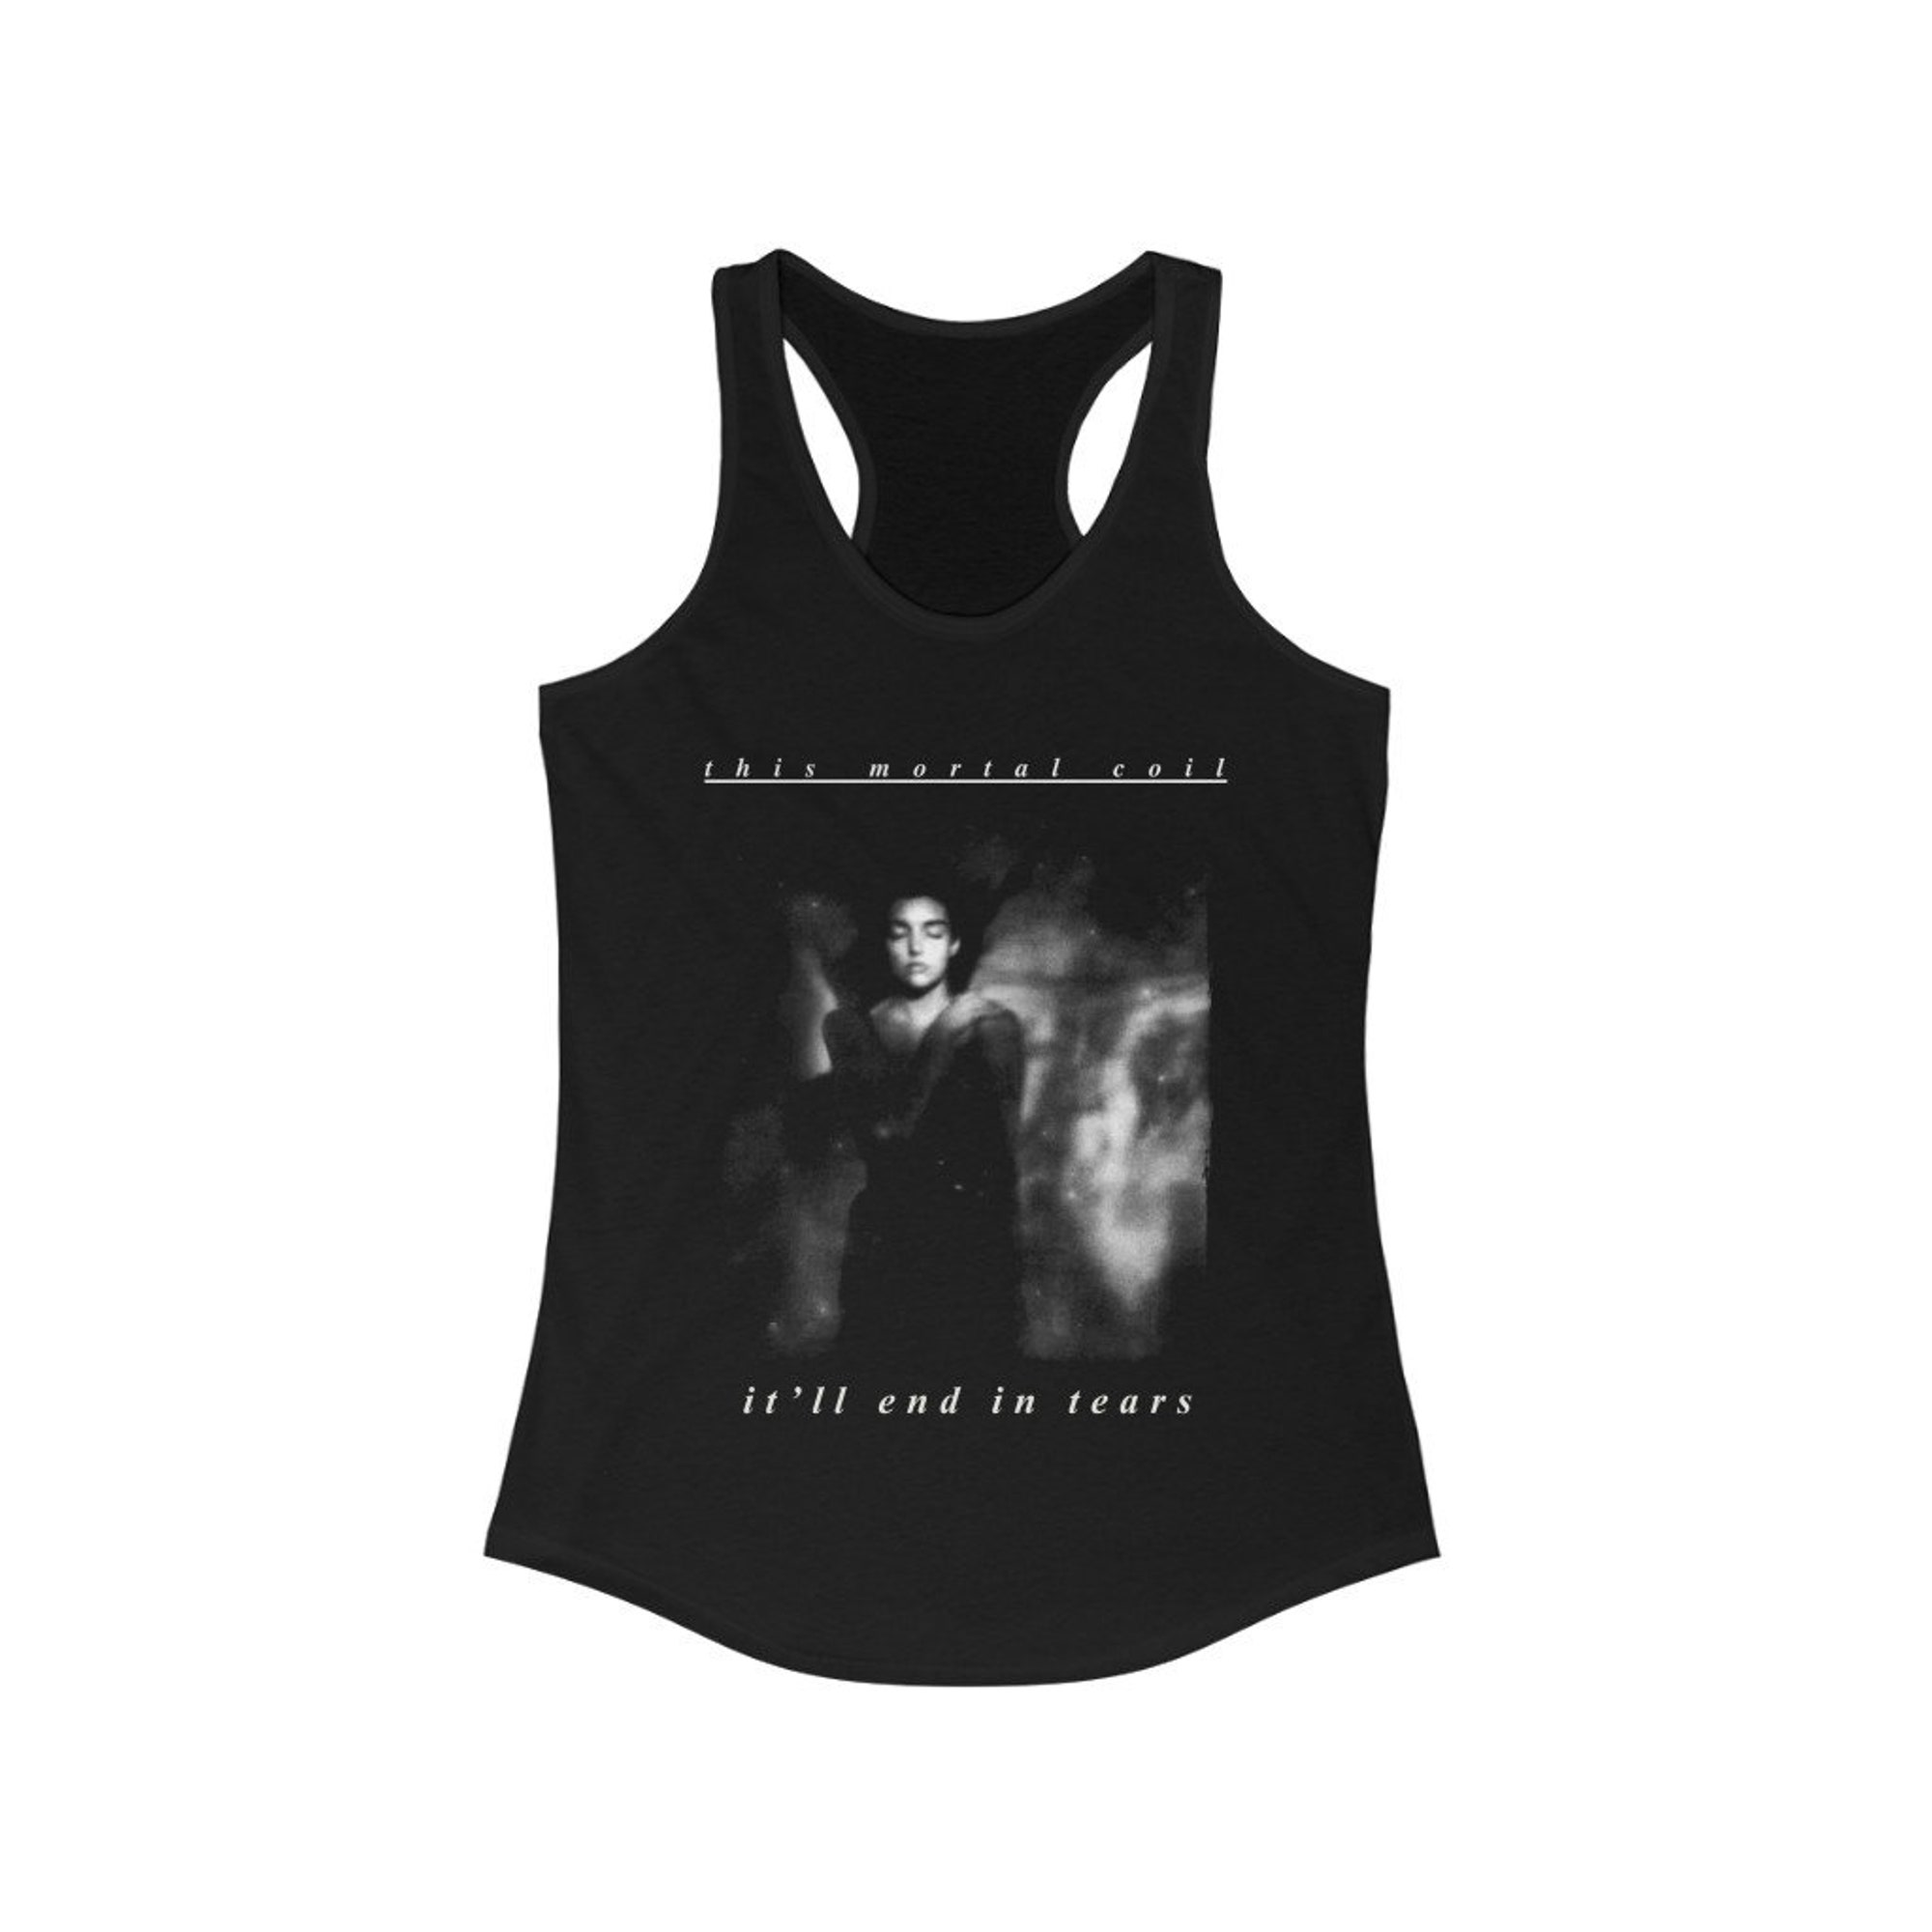 Discover This Mortal Coil Womens Tank Top - It'll End In Tears Sleeveless Tee - Gothic Rock Band